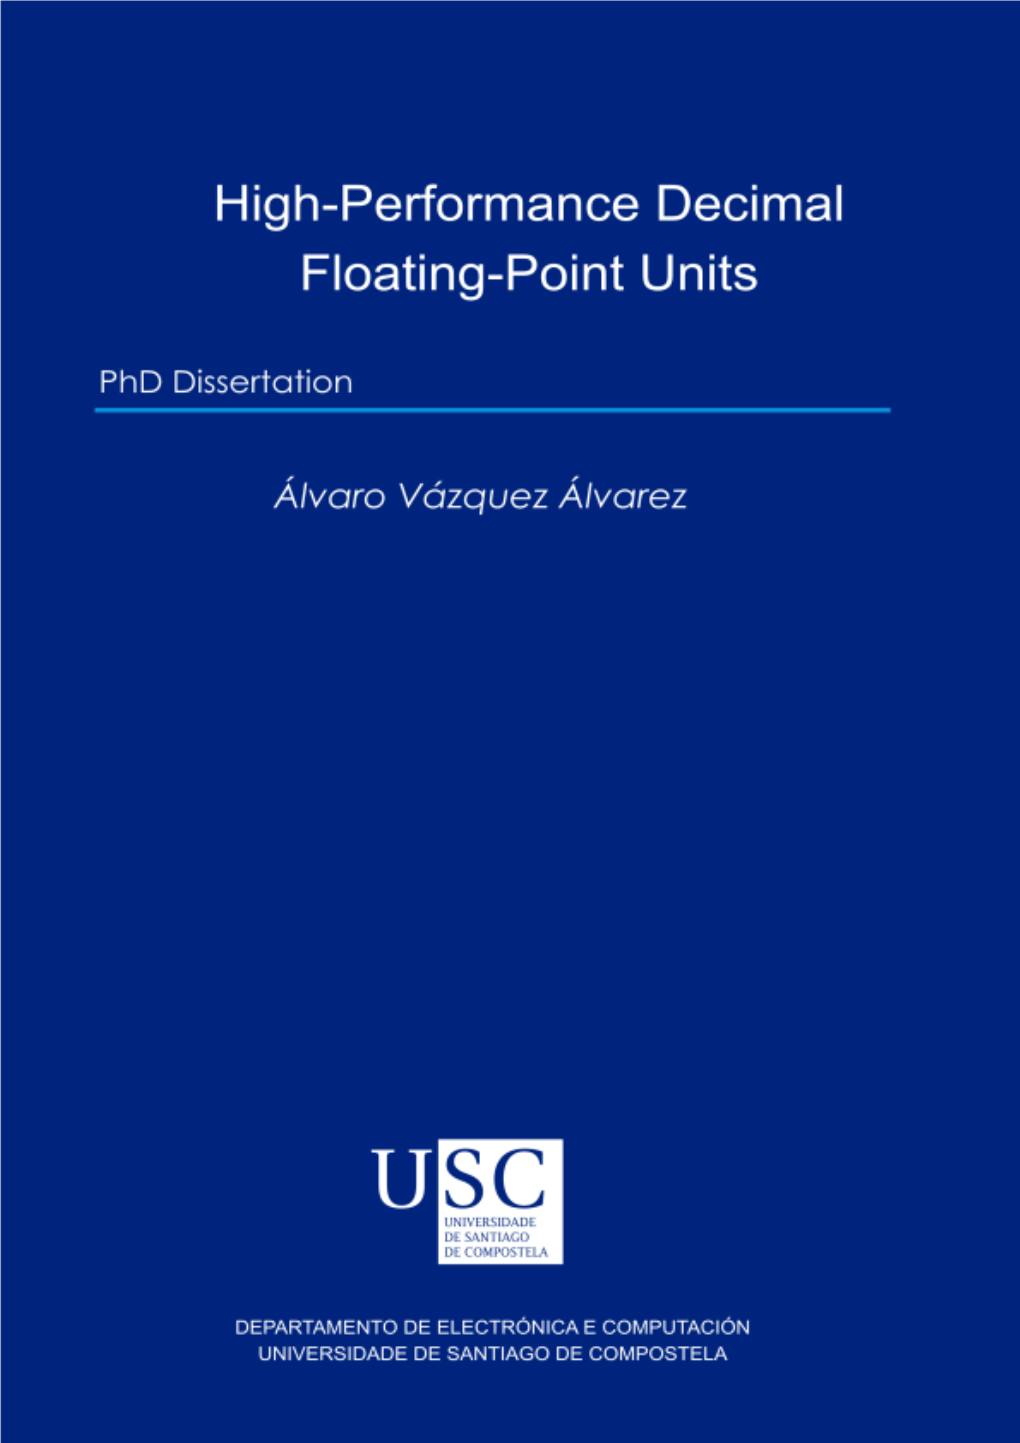 High-Performance Decimal Floating-Point Units